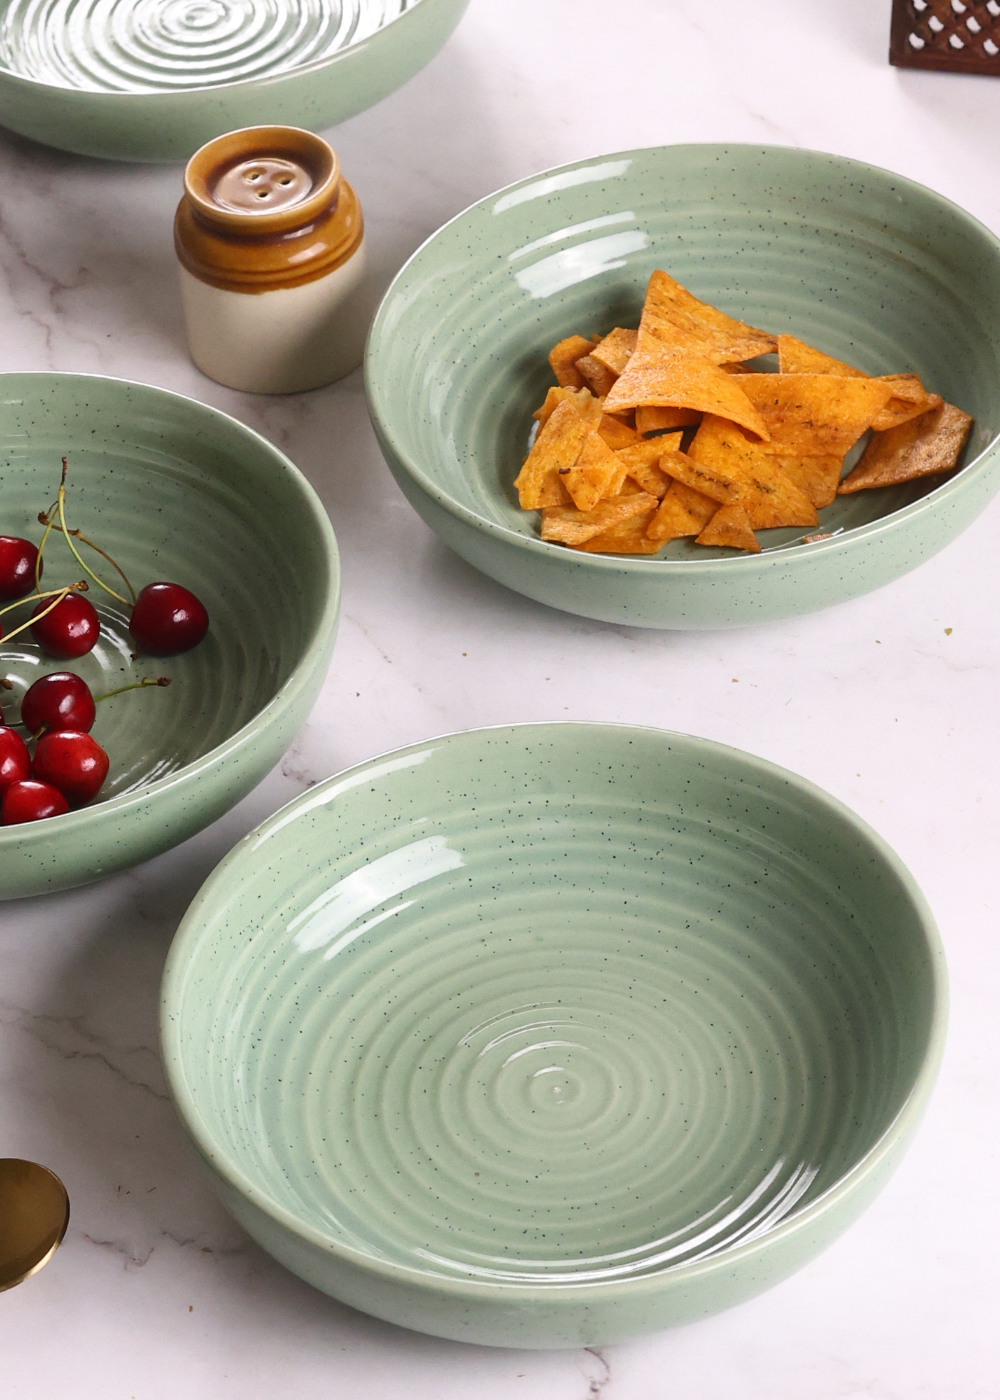 Dinnerware bowls with snack